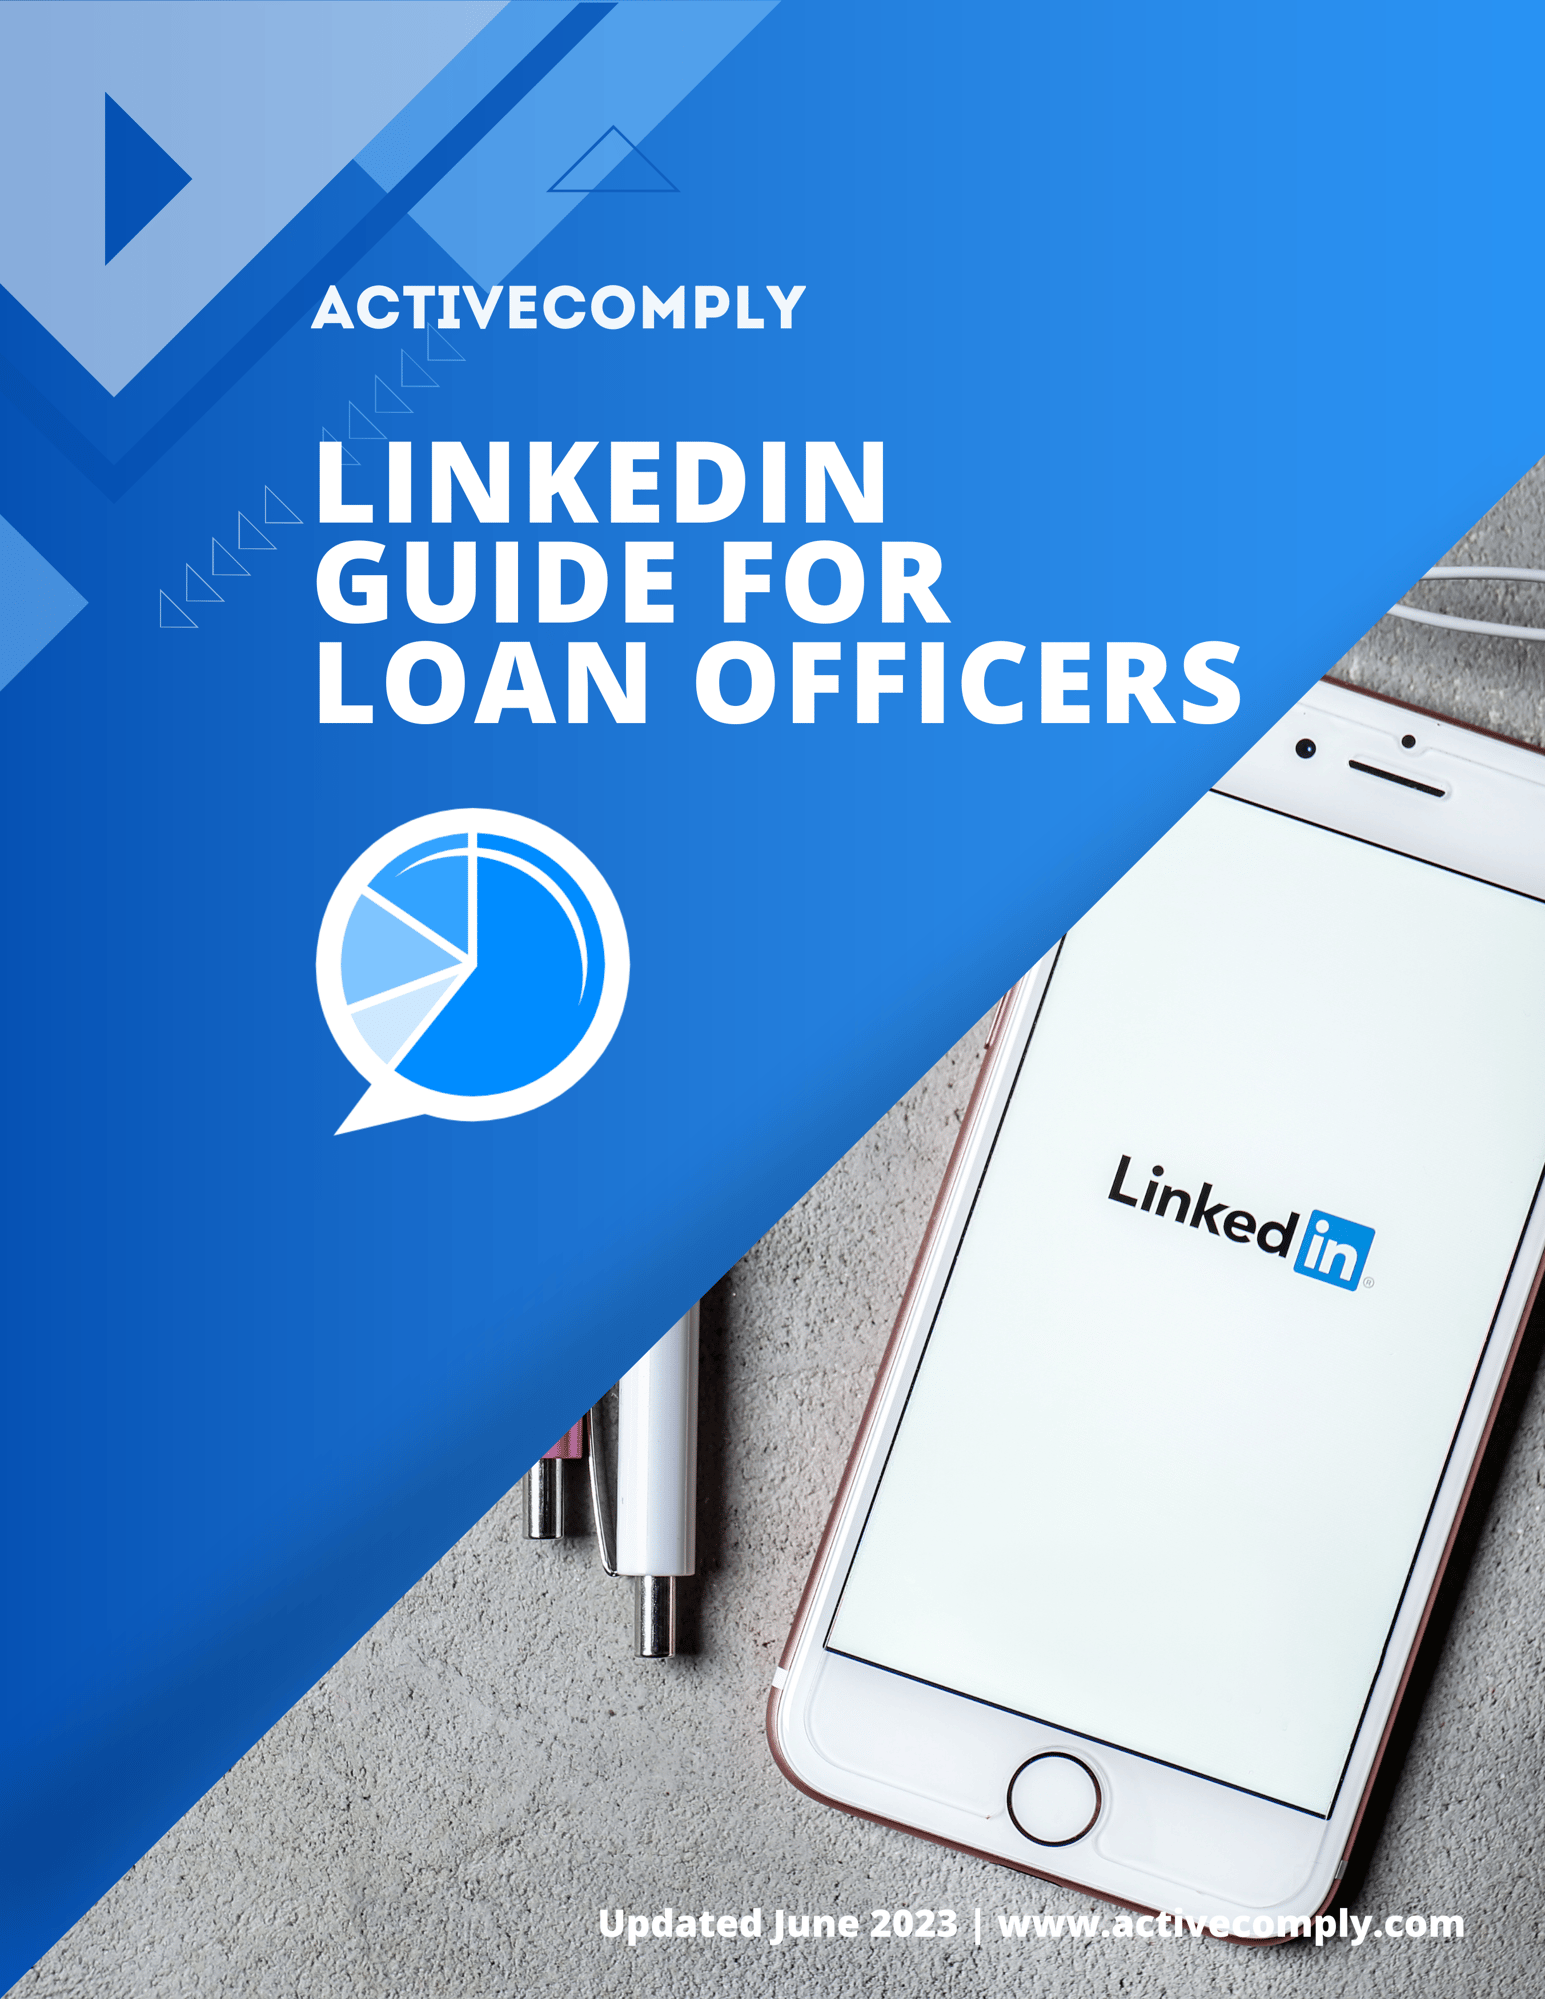 DONE - LinkedIn Guide for Loan Officers